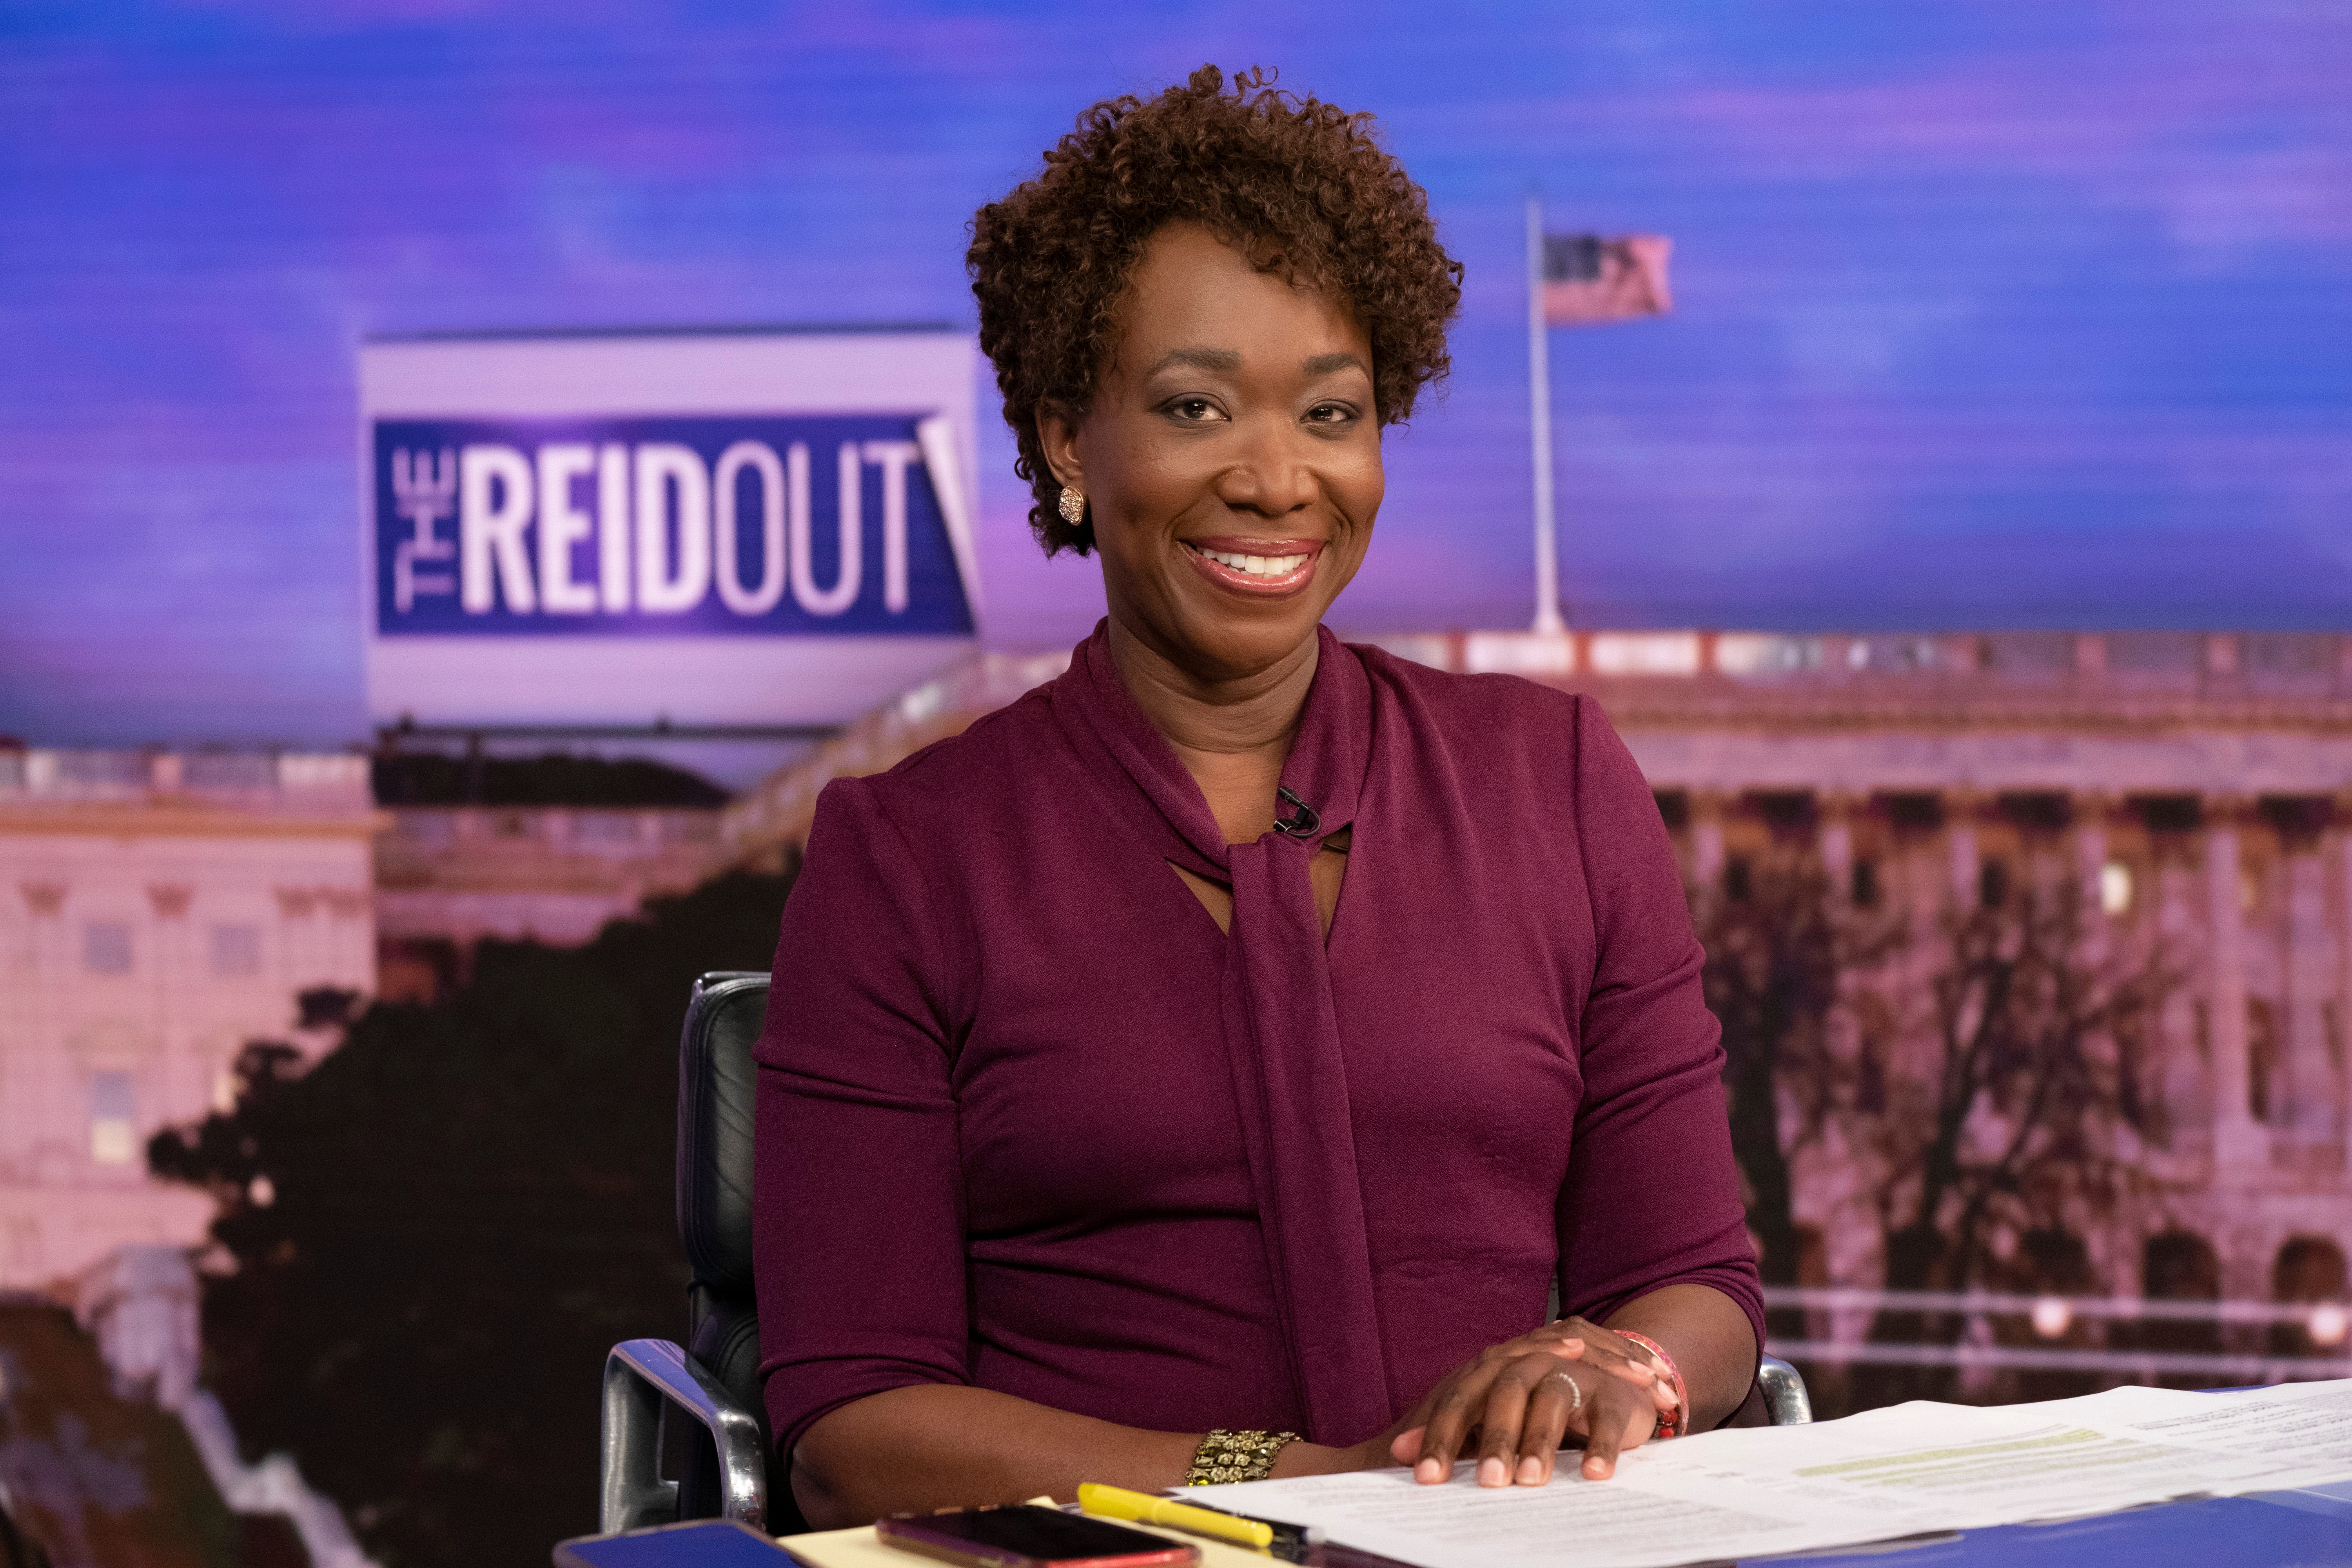 Who is Joy Reid? And why is everyone mad at her? Here's what we know about the MSNBC host